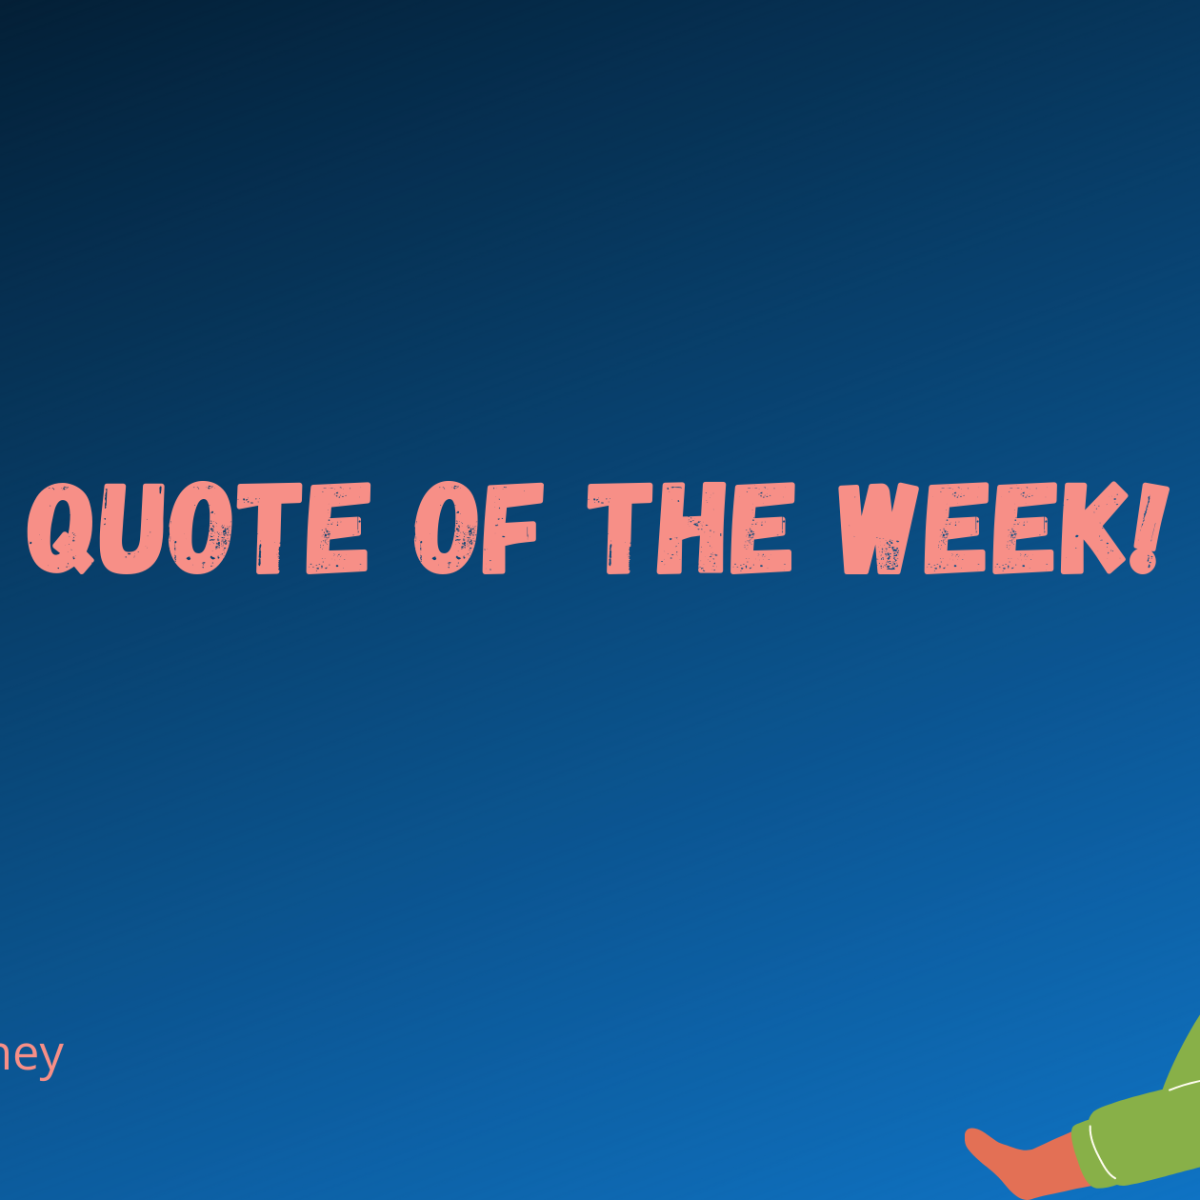 Quote of the week